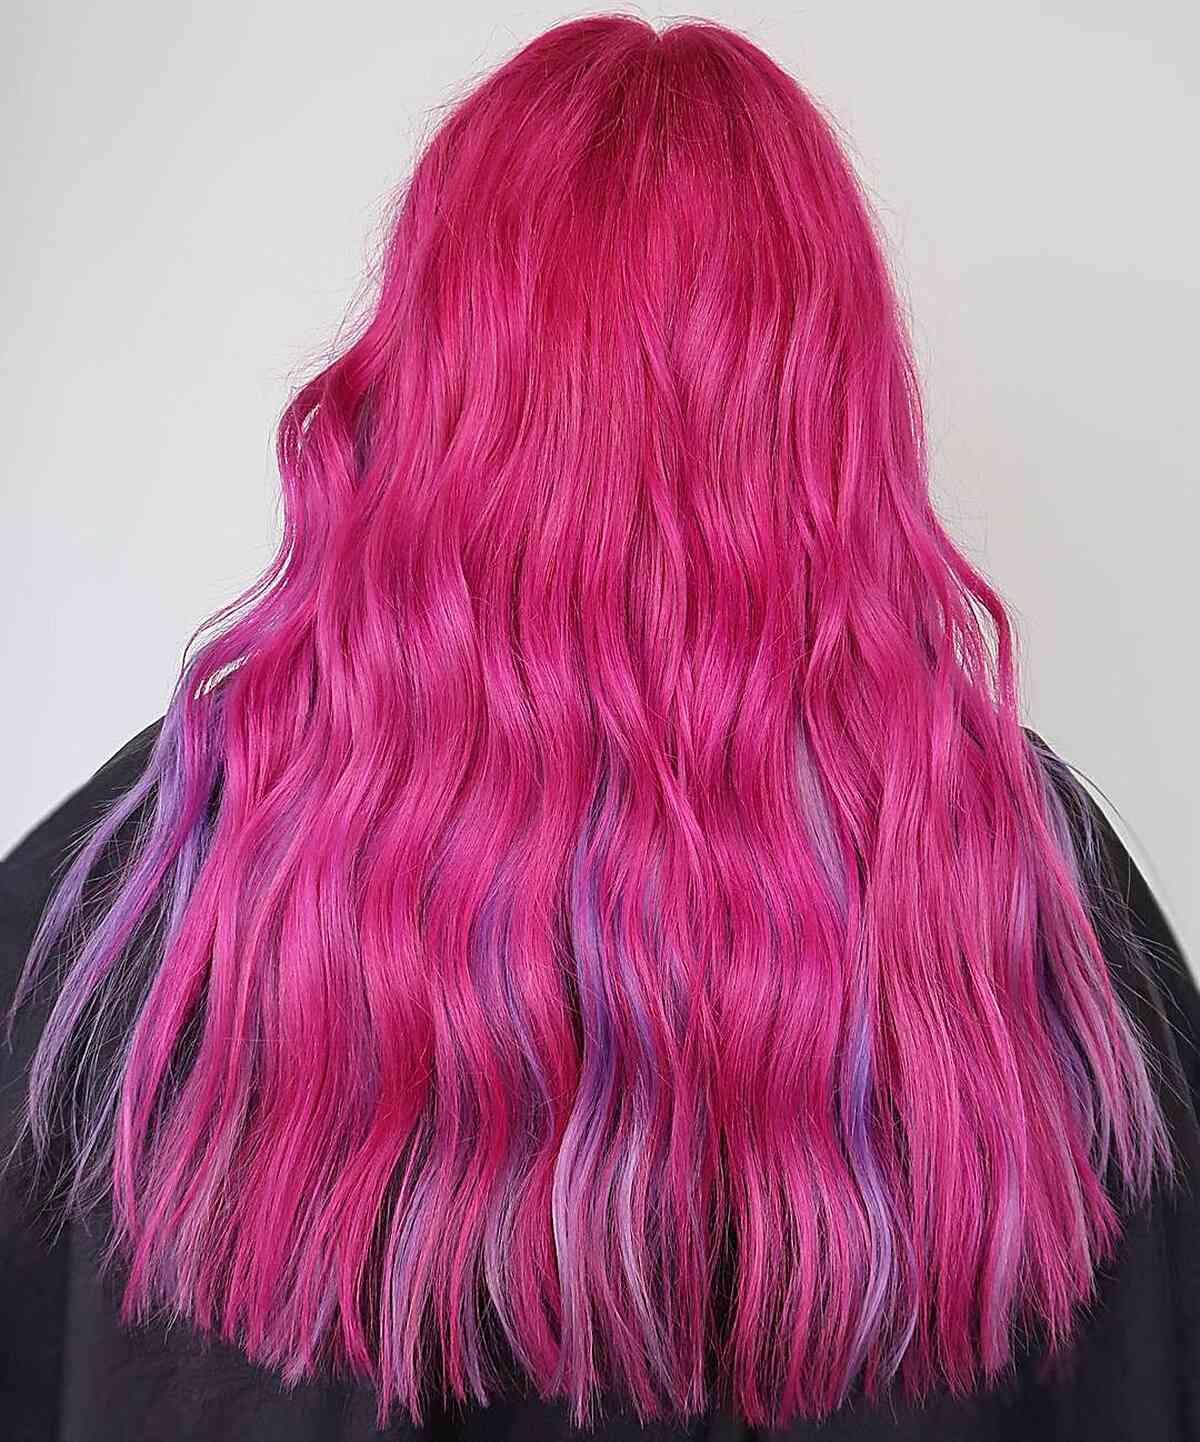 Long Pink Hair with Pops of Purple Tones for women with an edgy style